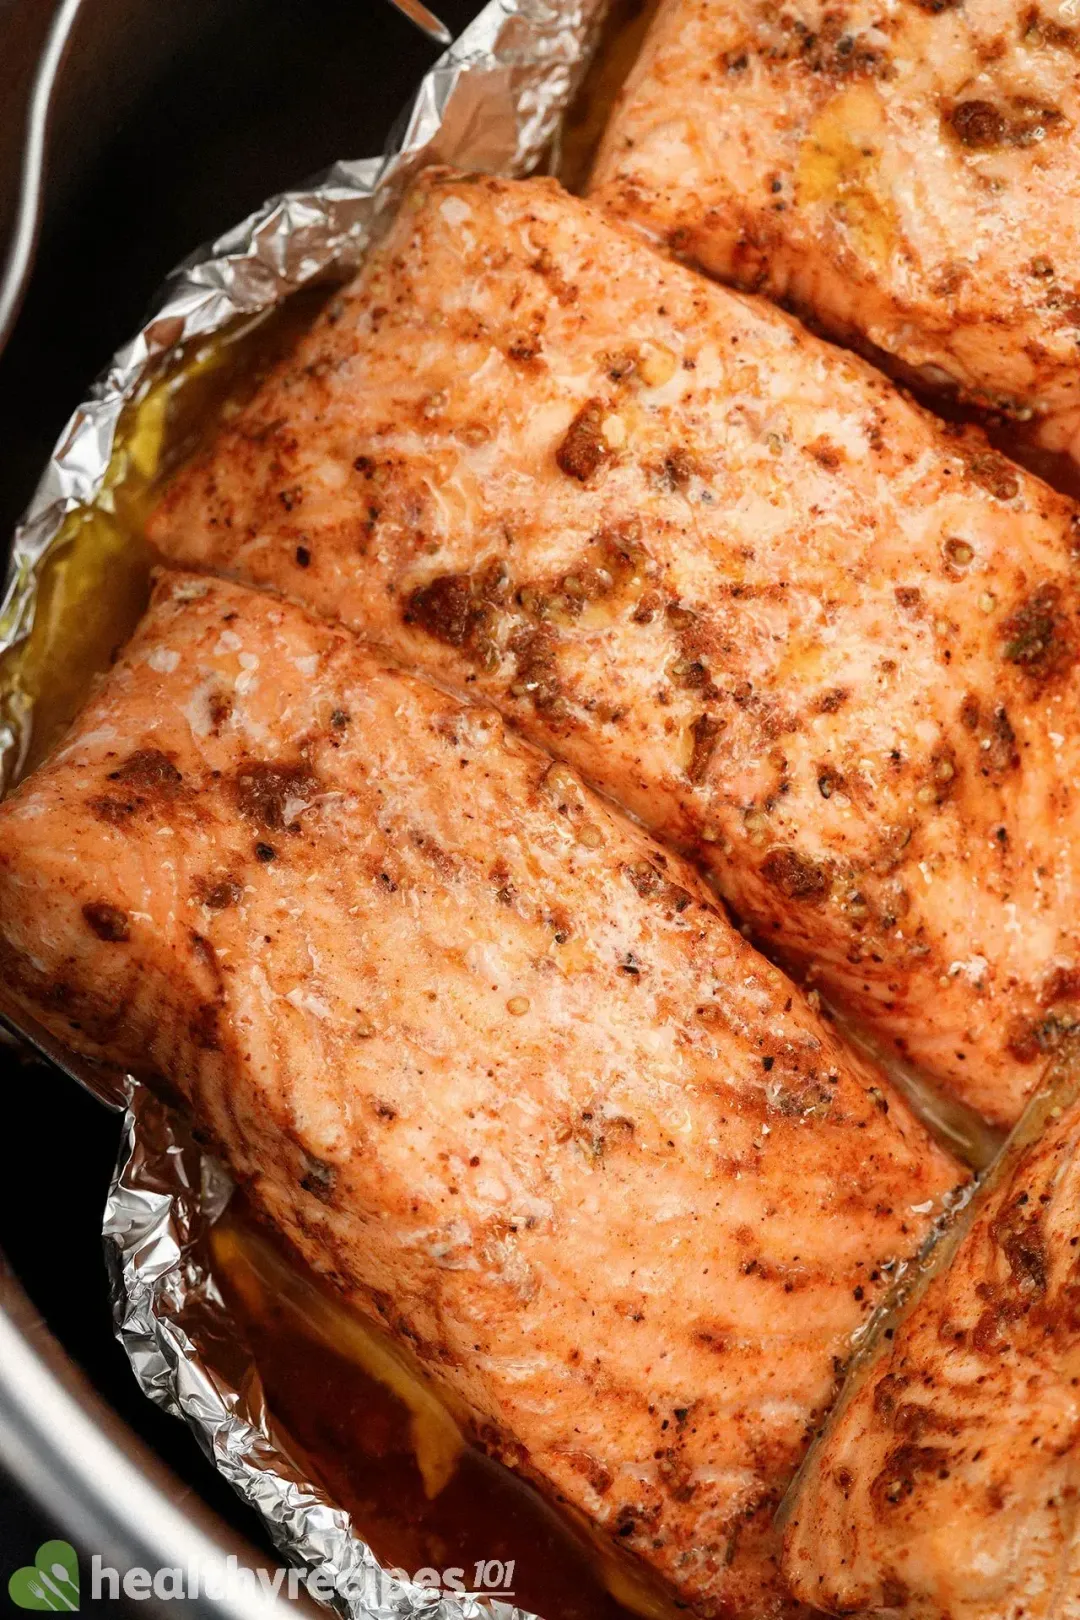 Well-seasoned salmon fillets wrapped in aluminium foil and placed in an Instant Pot waiting to be cooked